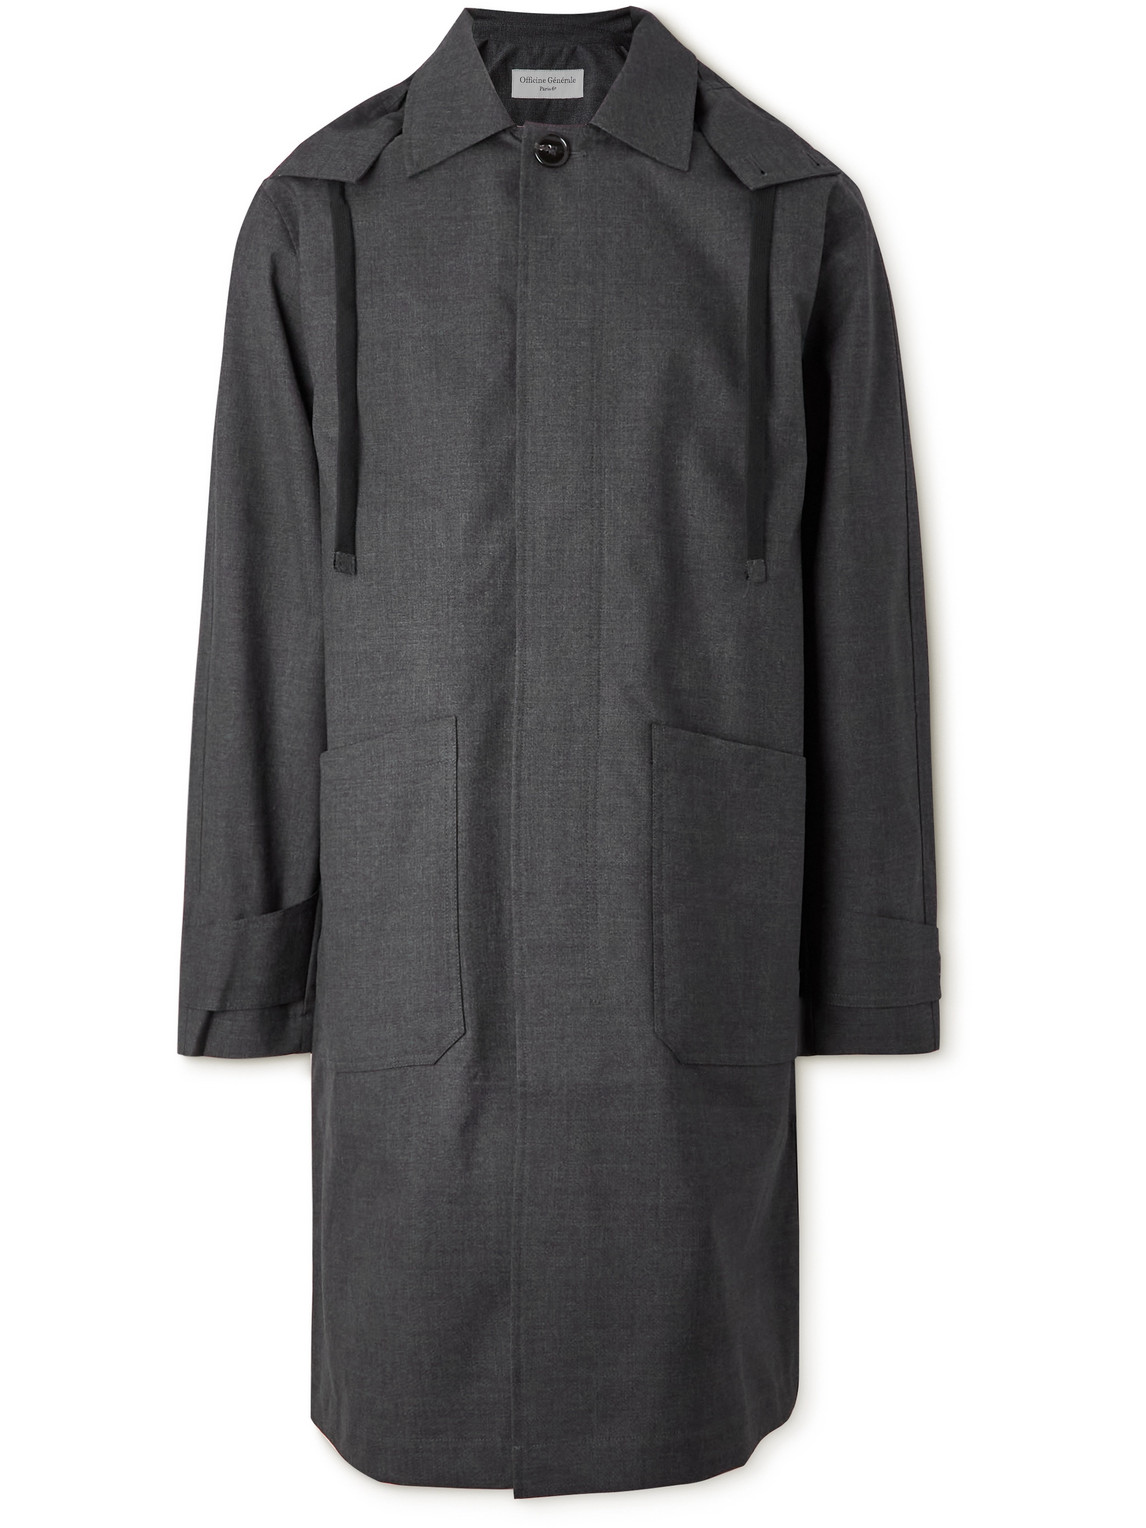 OFFICINE GENERALE ARCHIBALD WOOL-BLEND HOODED TRENCH COAT